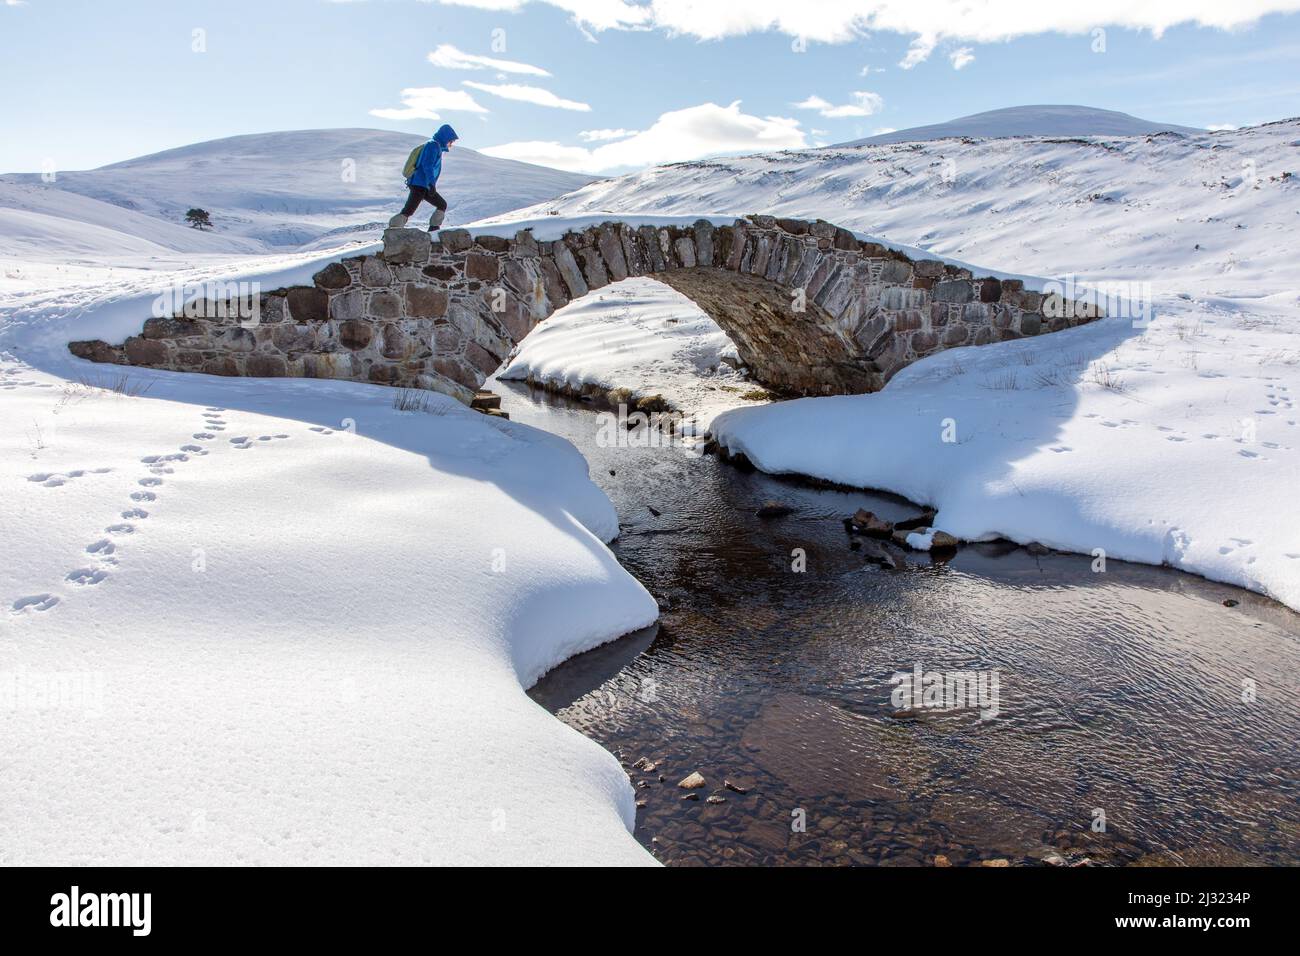 Walkers on stone bridge, Old Miltary Road in snow, Corgarff, Lecht Road, Cairngorms, Highlands, Aberdeenshire, Scotland, UK Stock Photo